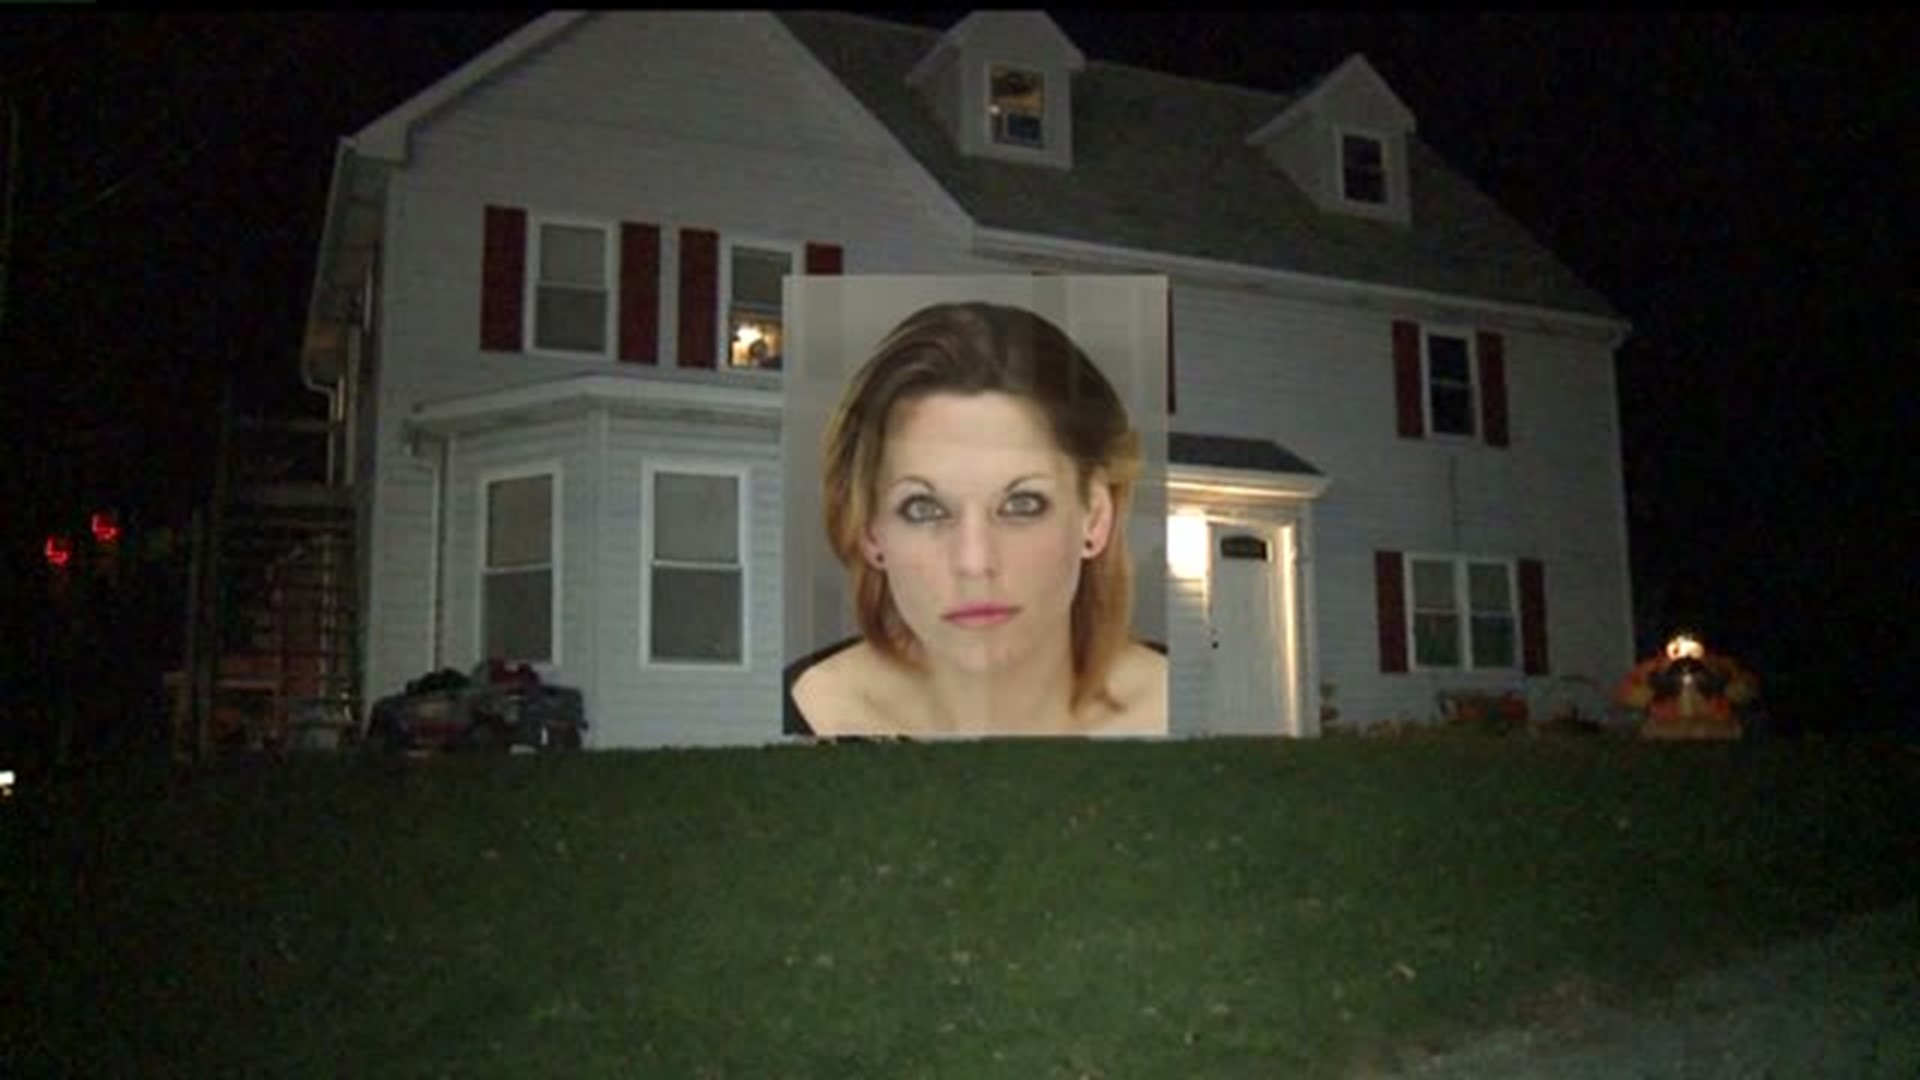 Lancaster Co. DA says woman abused stepson because she resented him